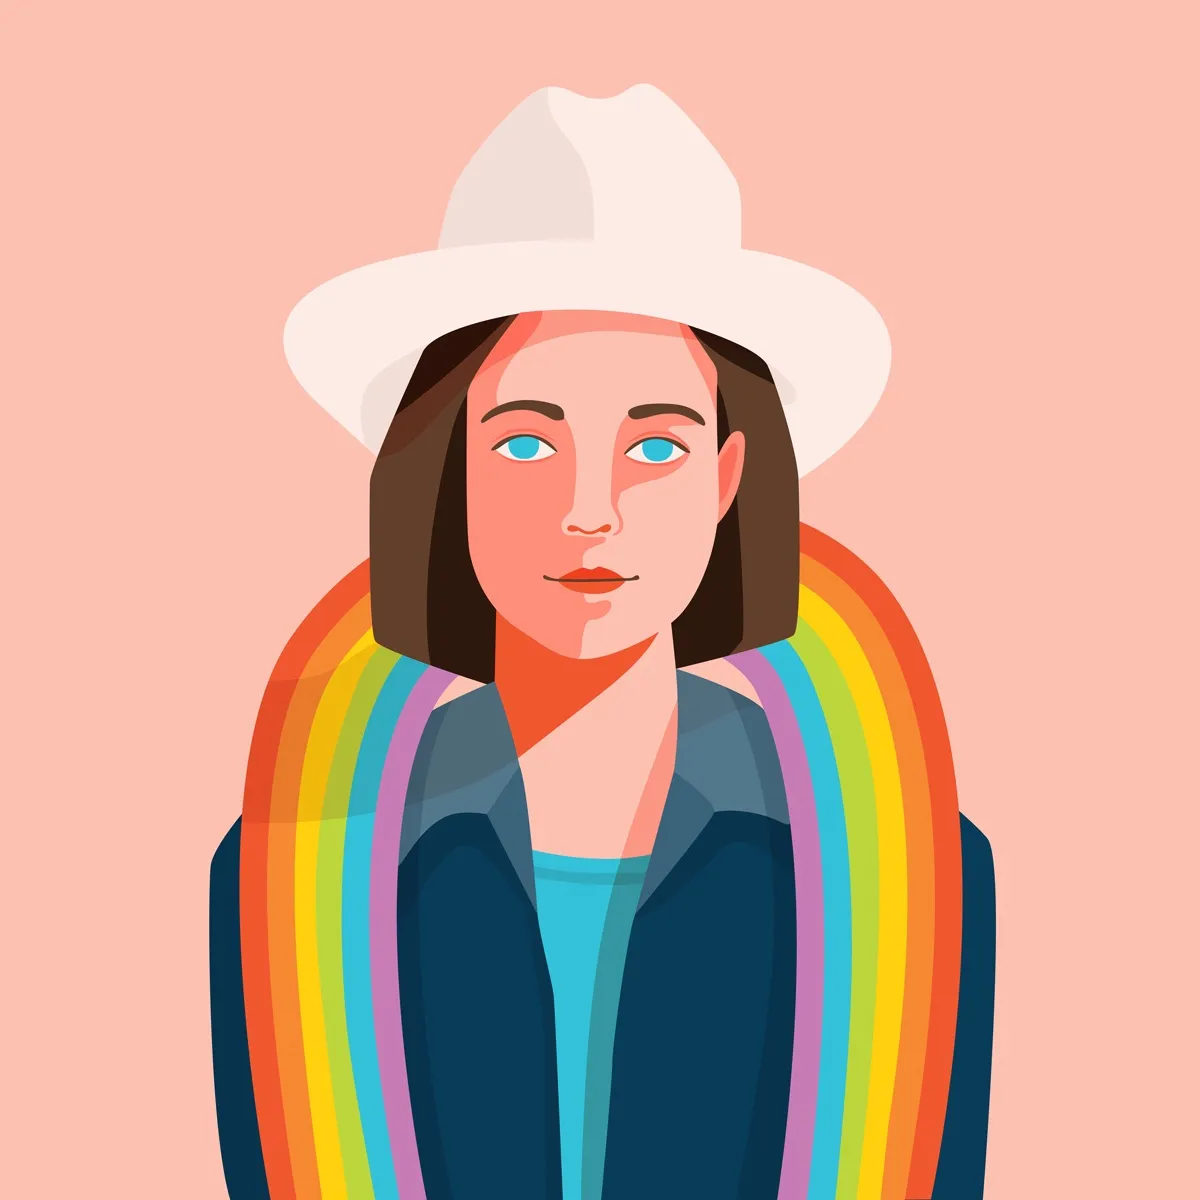 An illustration of a woman wearing a cowboy hat and a rainbow scarf